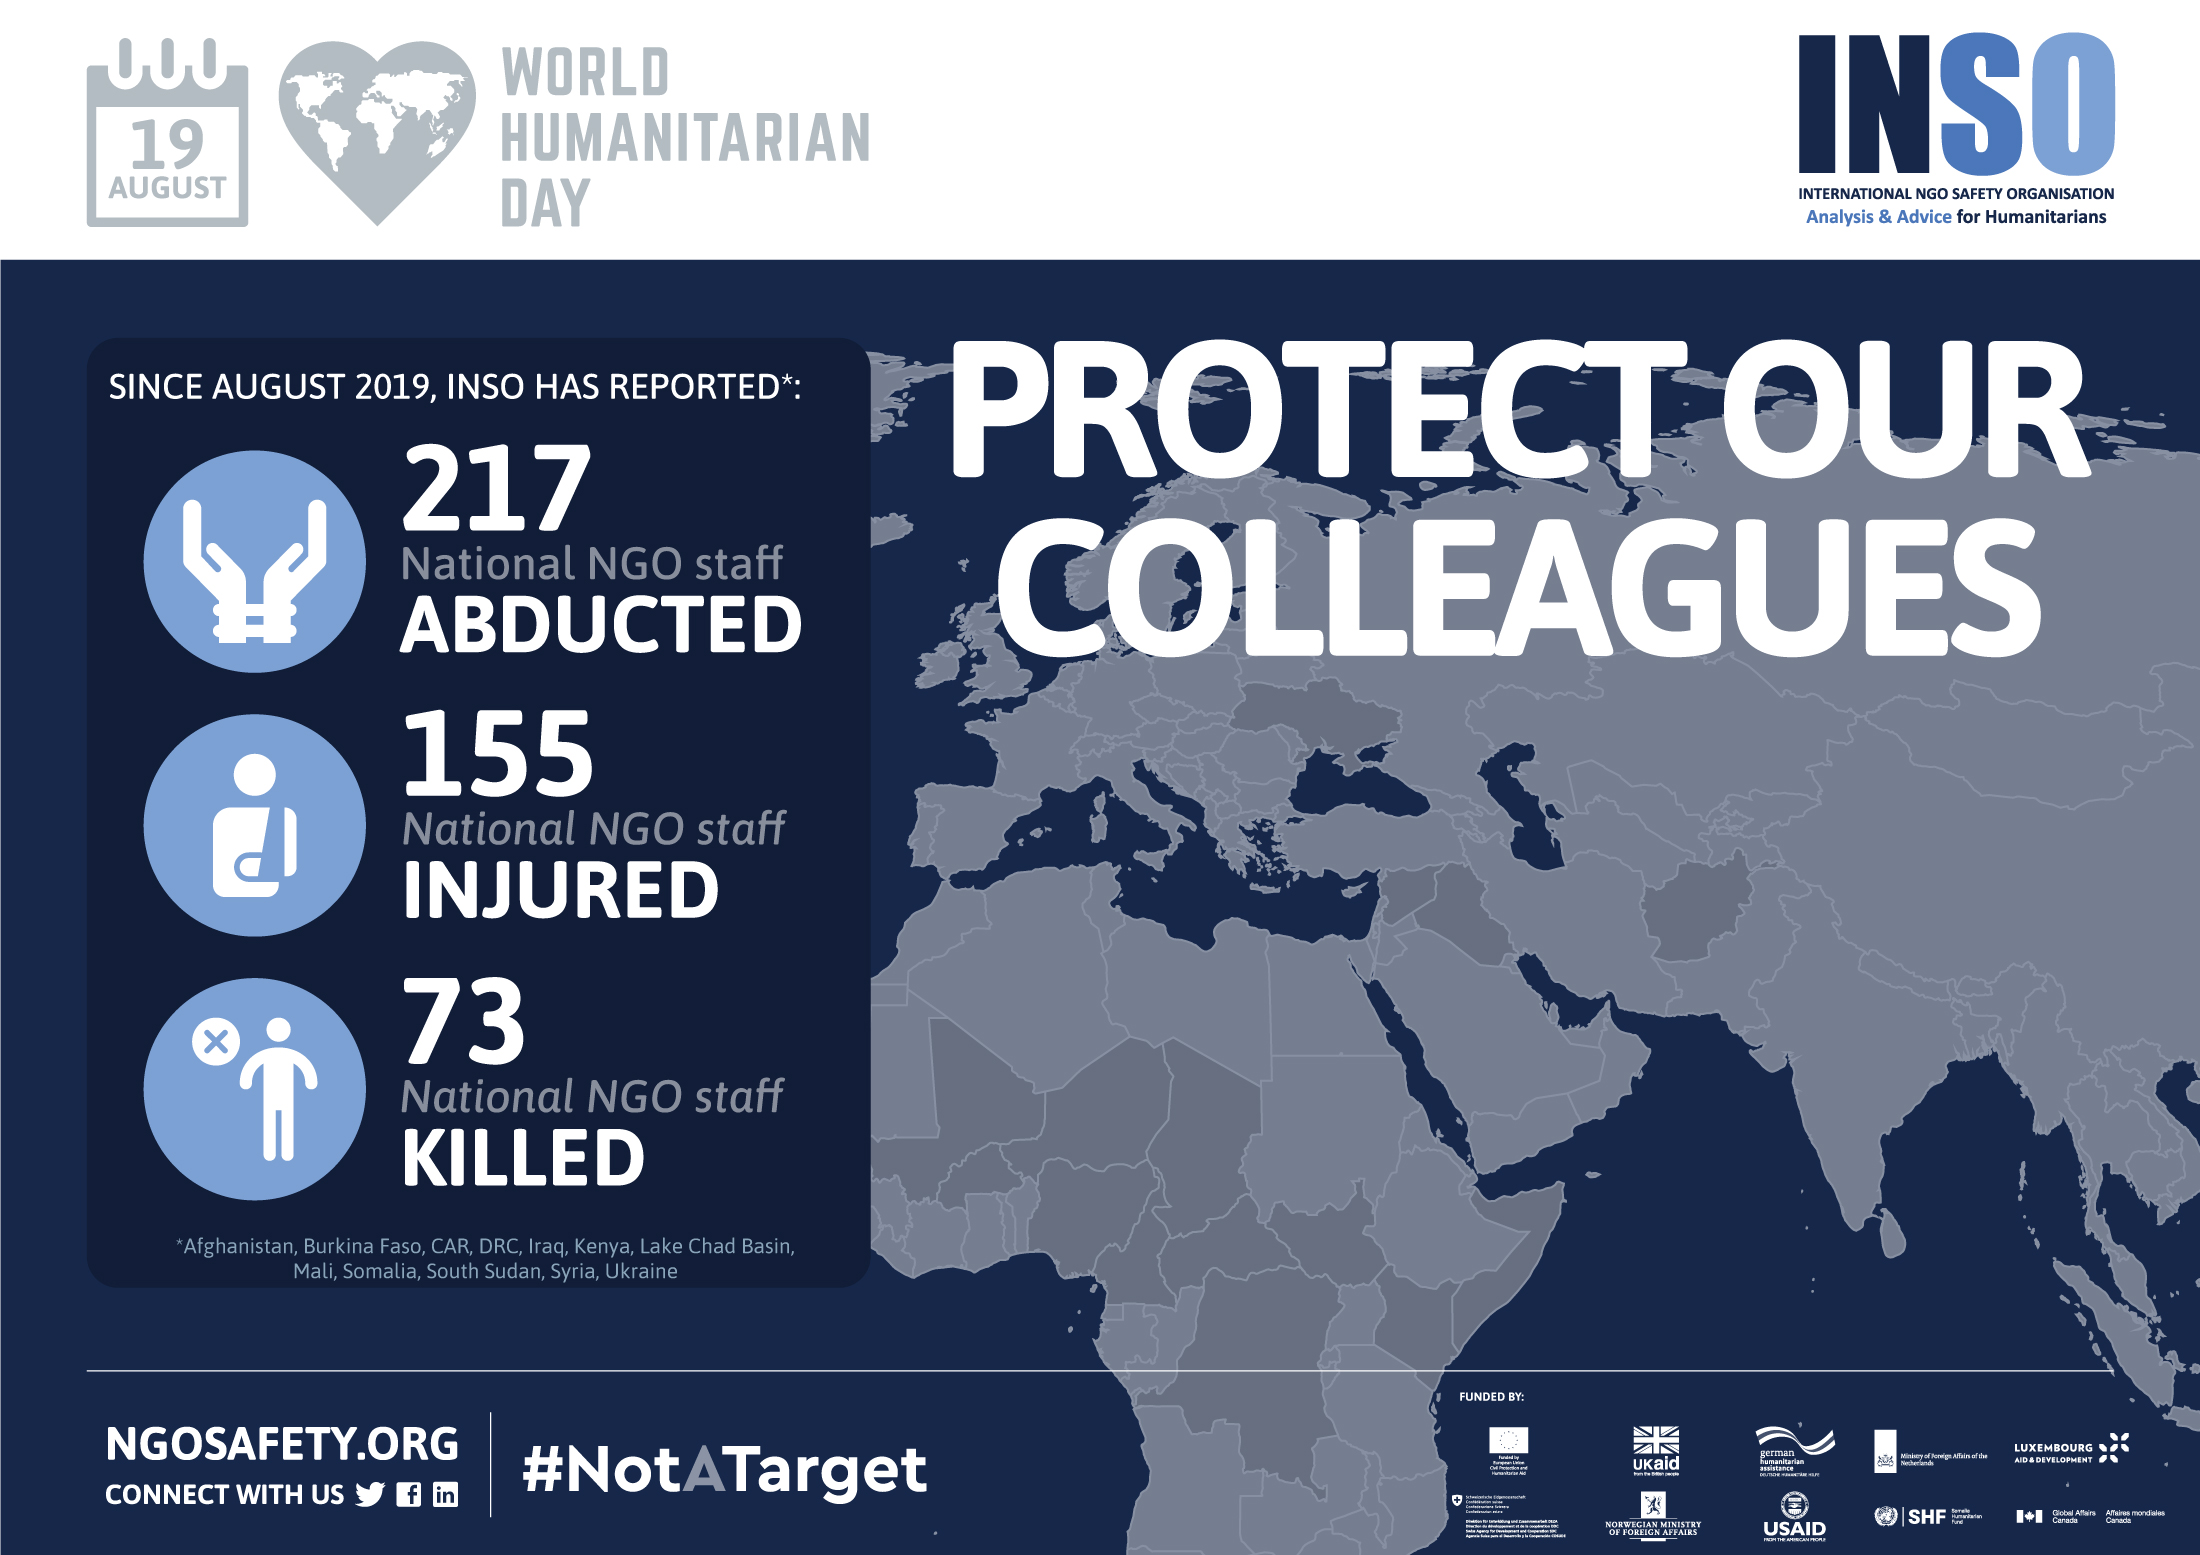 World Humanitarian Day 2020 graphic showing number of NGO workers abducted, killed and injured